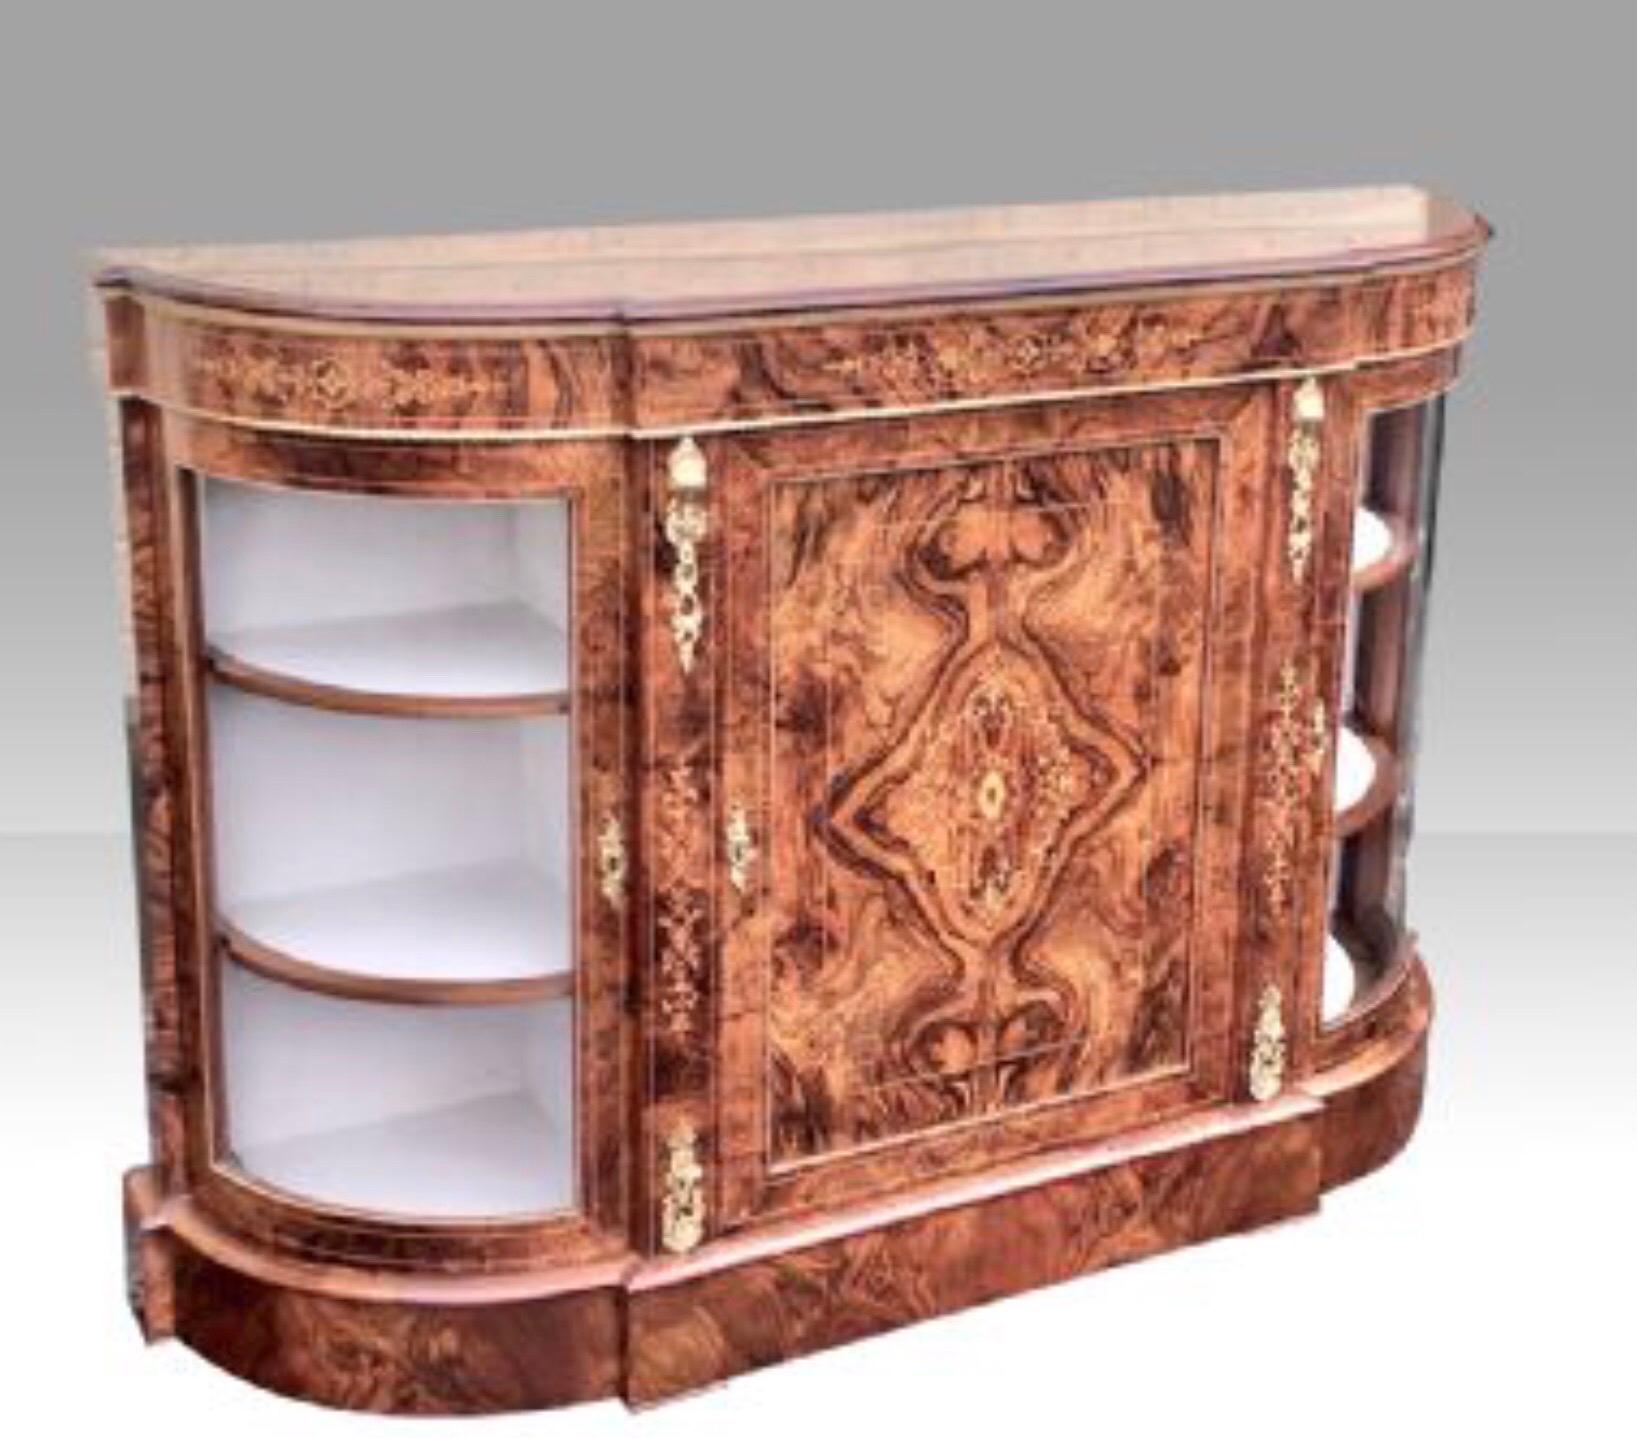 Antique Burr Walnut and Gilt Ormolu Mounted Antique Credenza Cabinet Sideboard In Excellent Condition For Sale In Antrim, GB